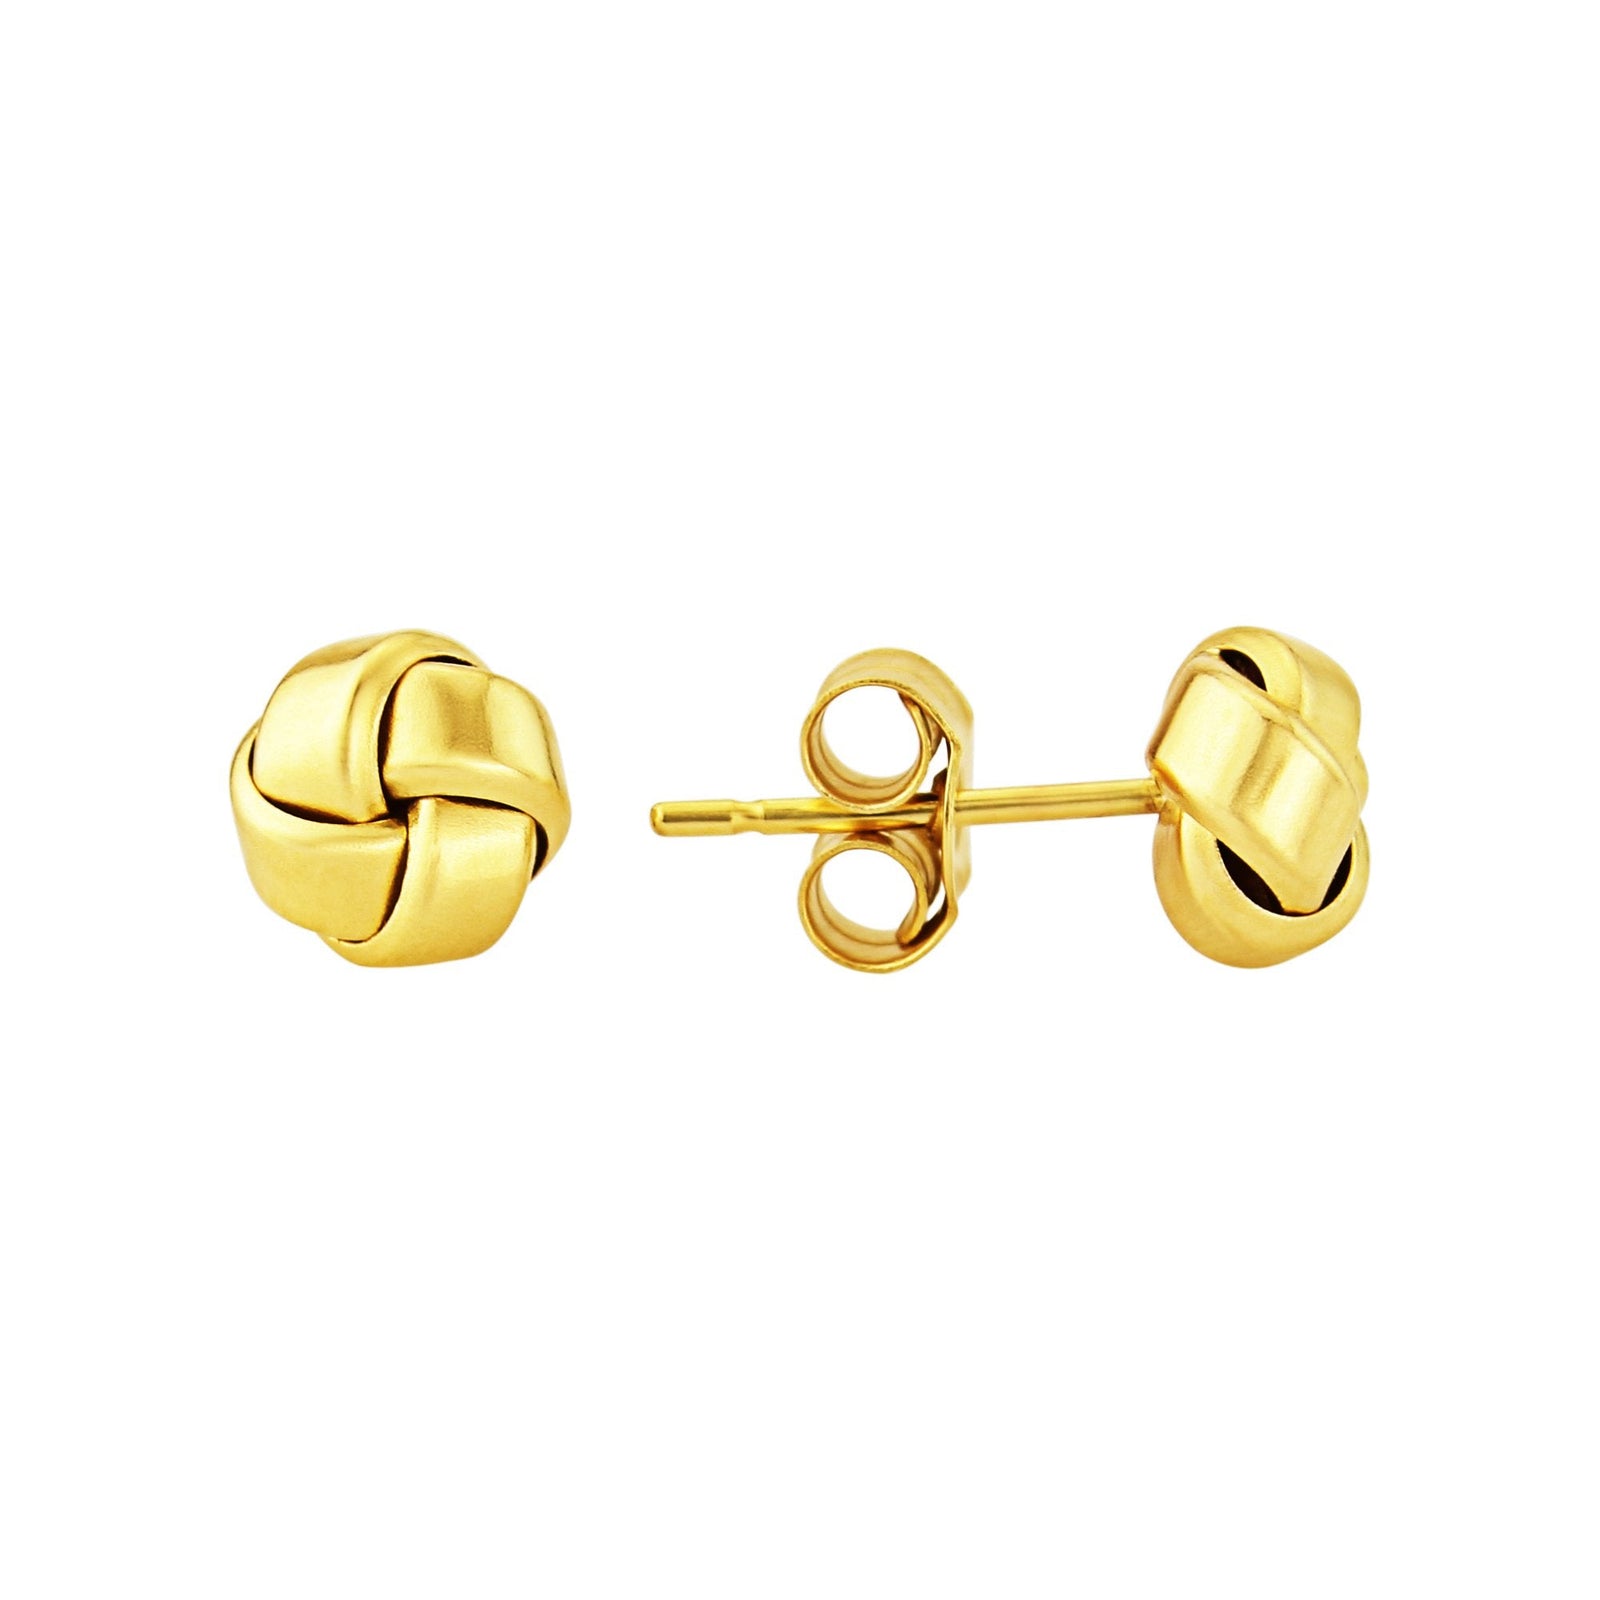 9ct gold knot studs